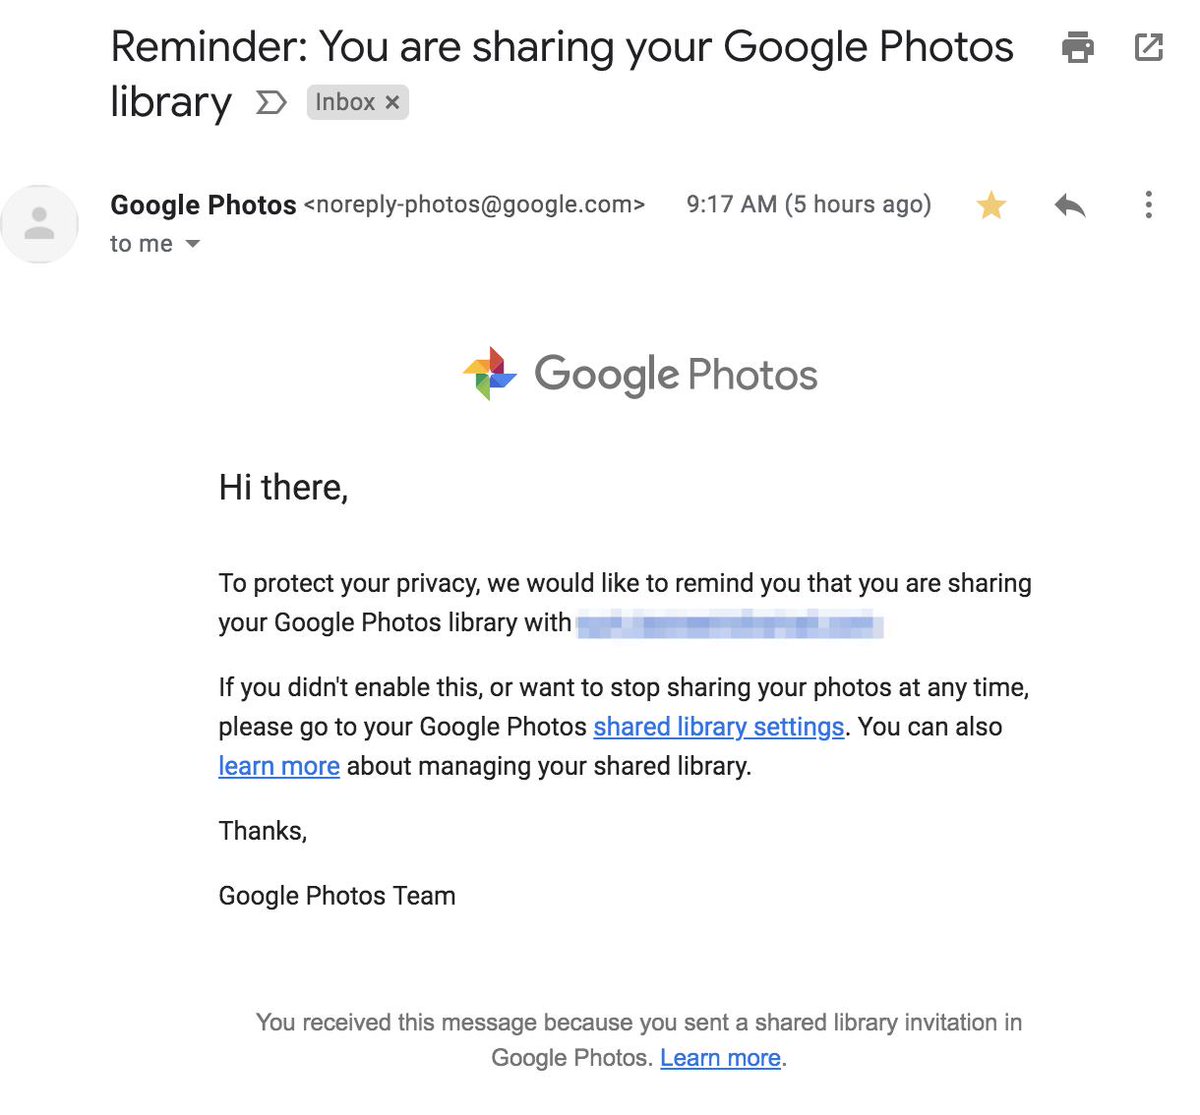  #delightful_design_details #1When sharing an entire photo library on Google Photos (not just an album), users get periodic email reminders it's still active. Being proactive about privacy settings, even when they were explicitly set, makes users feeling reassured and valued.